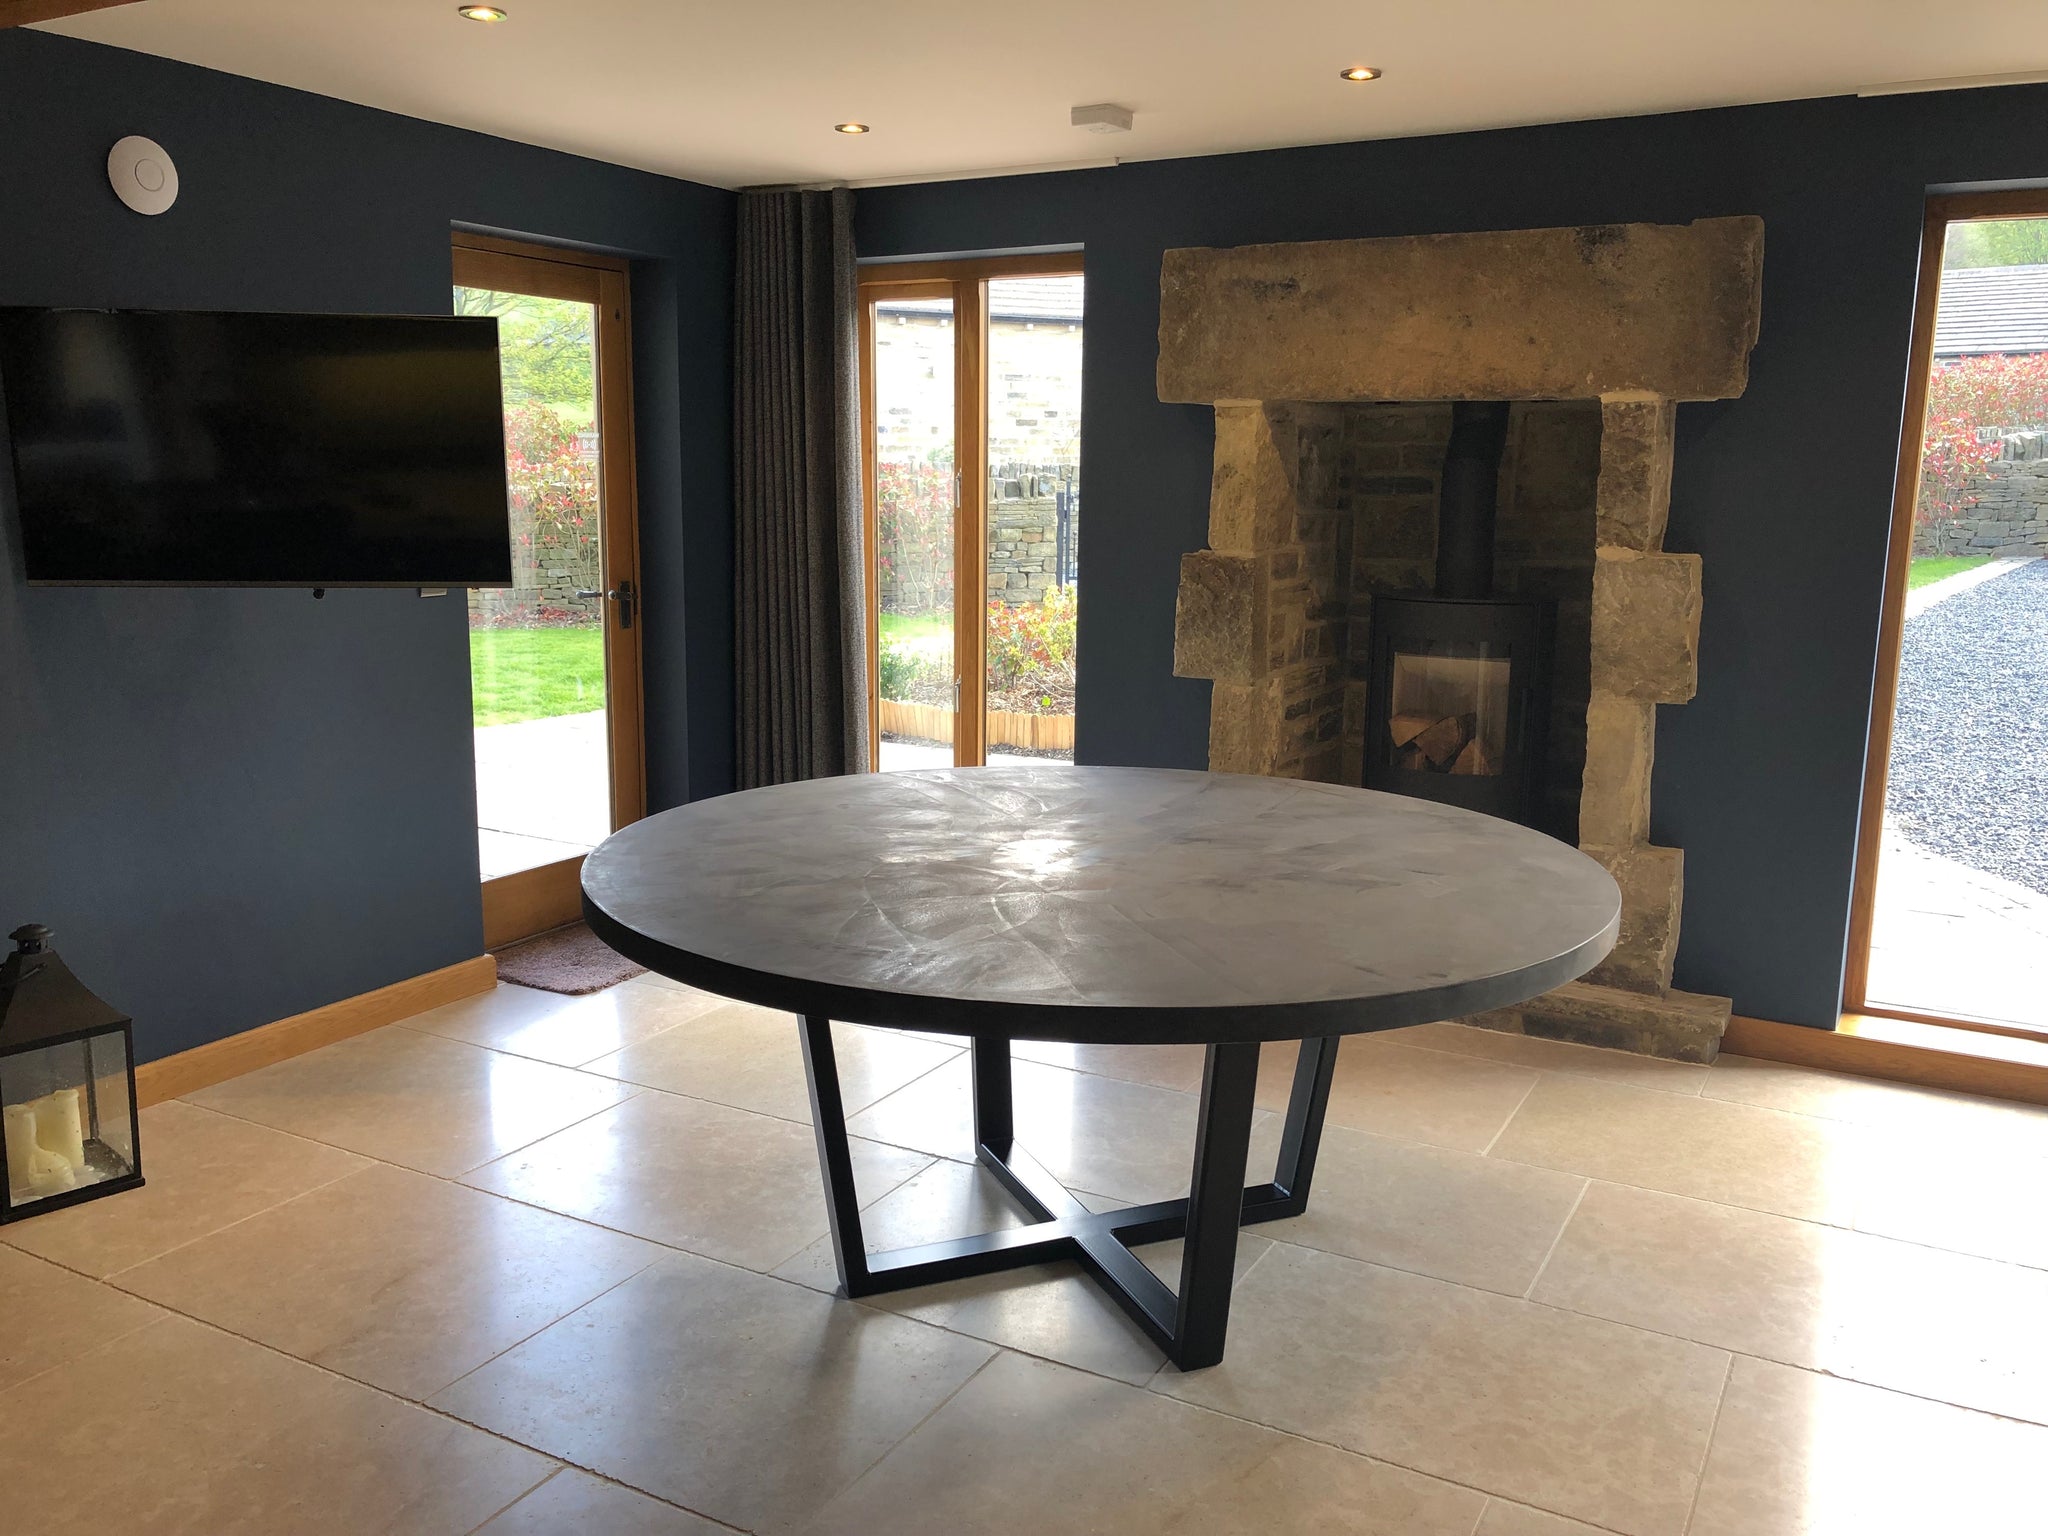 Round Polished Concrete Dining Table In Mid Grey Daniel Polished Concrete